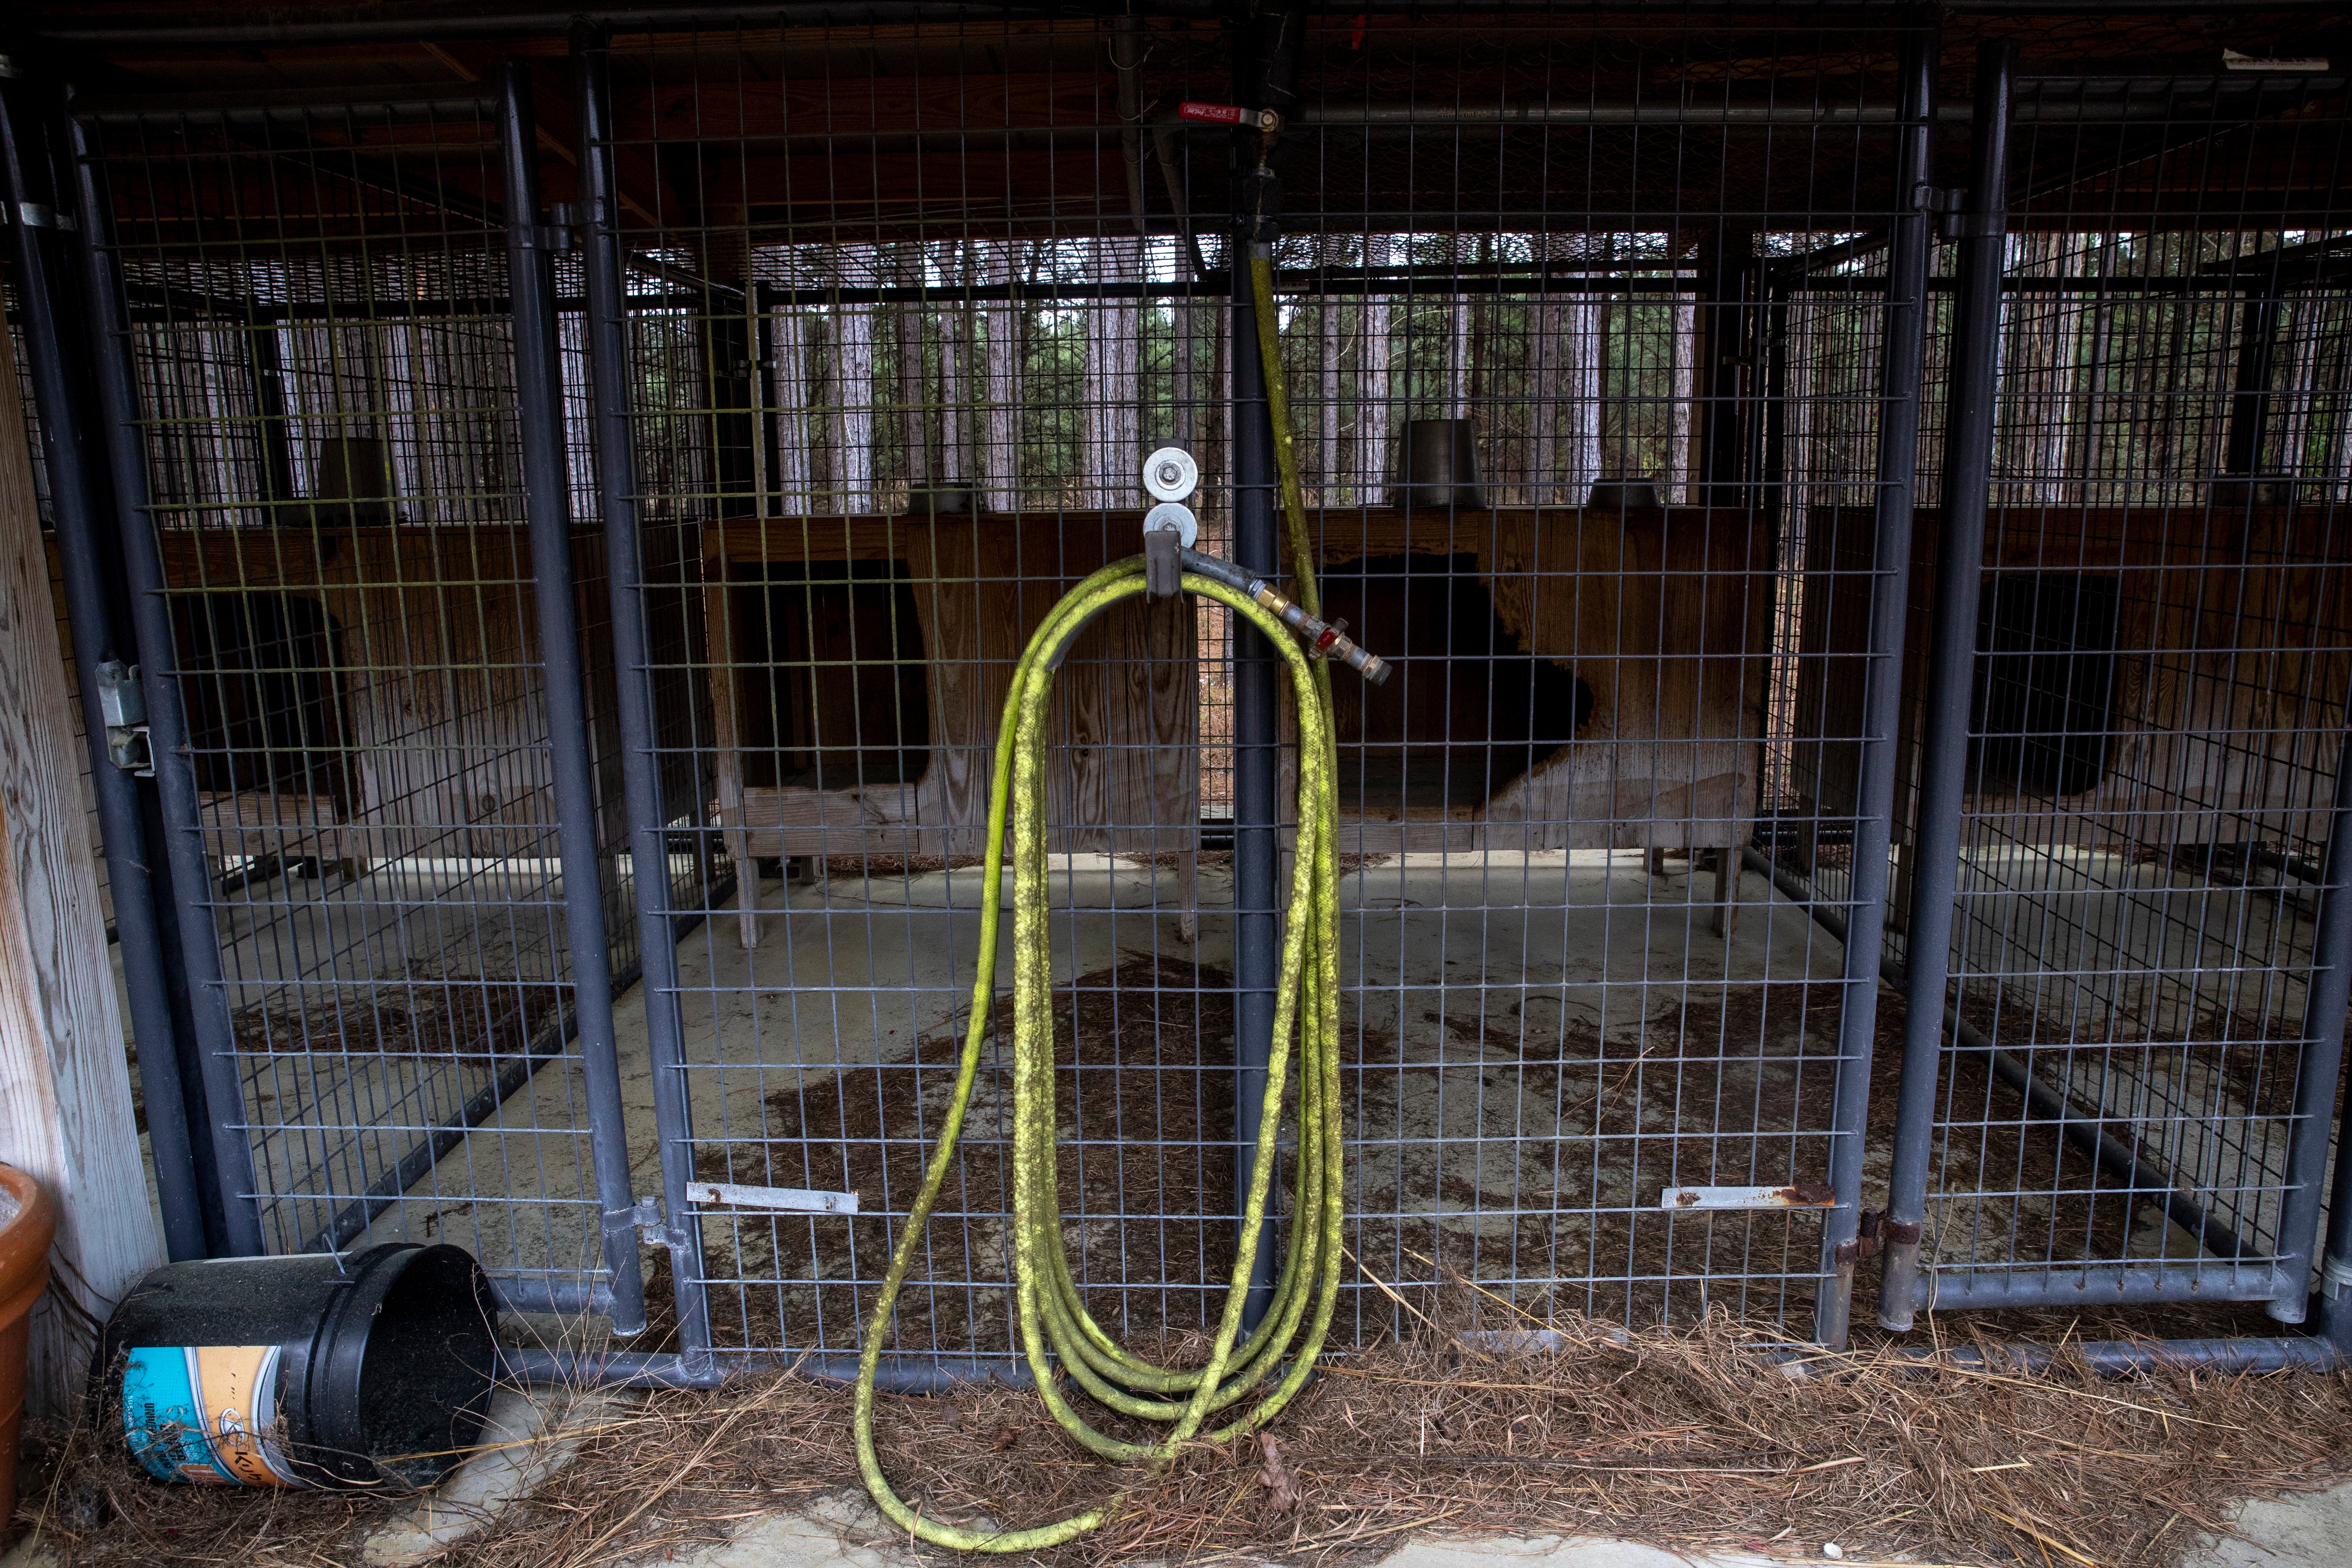 A hose in the dog kennels at the Murdaugh Moselle property on Wednesday